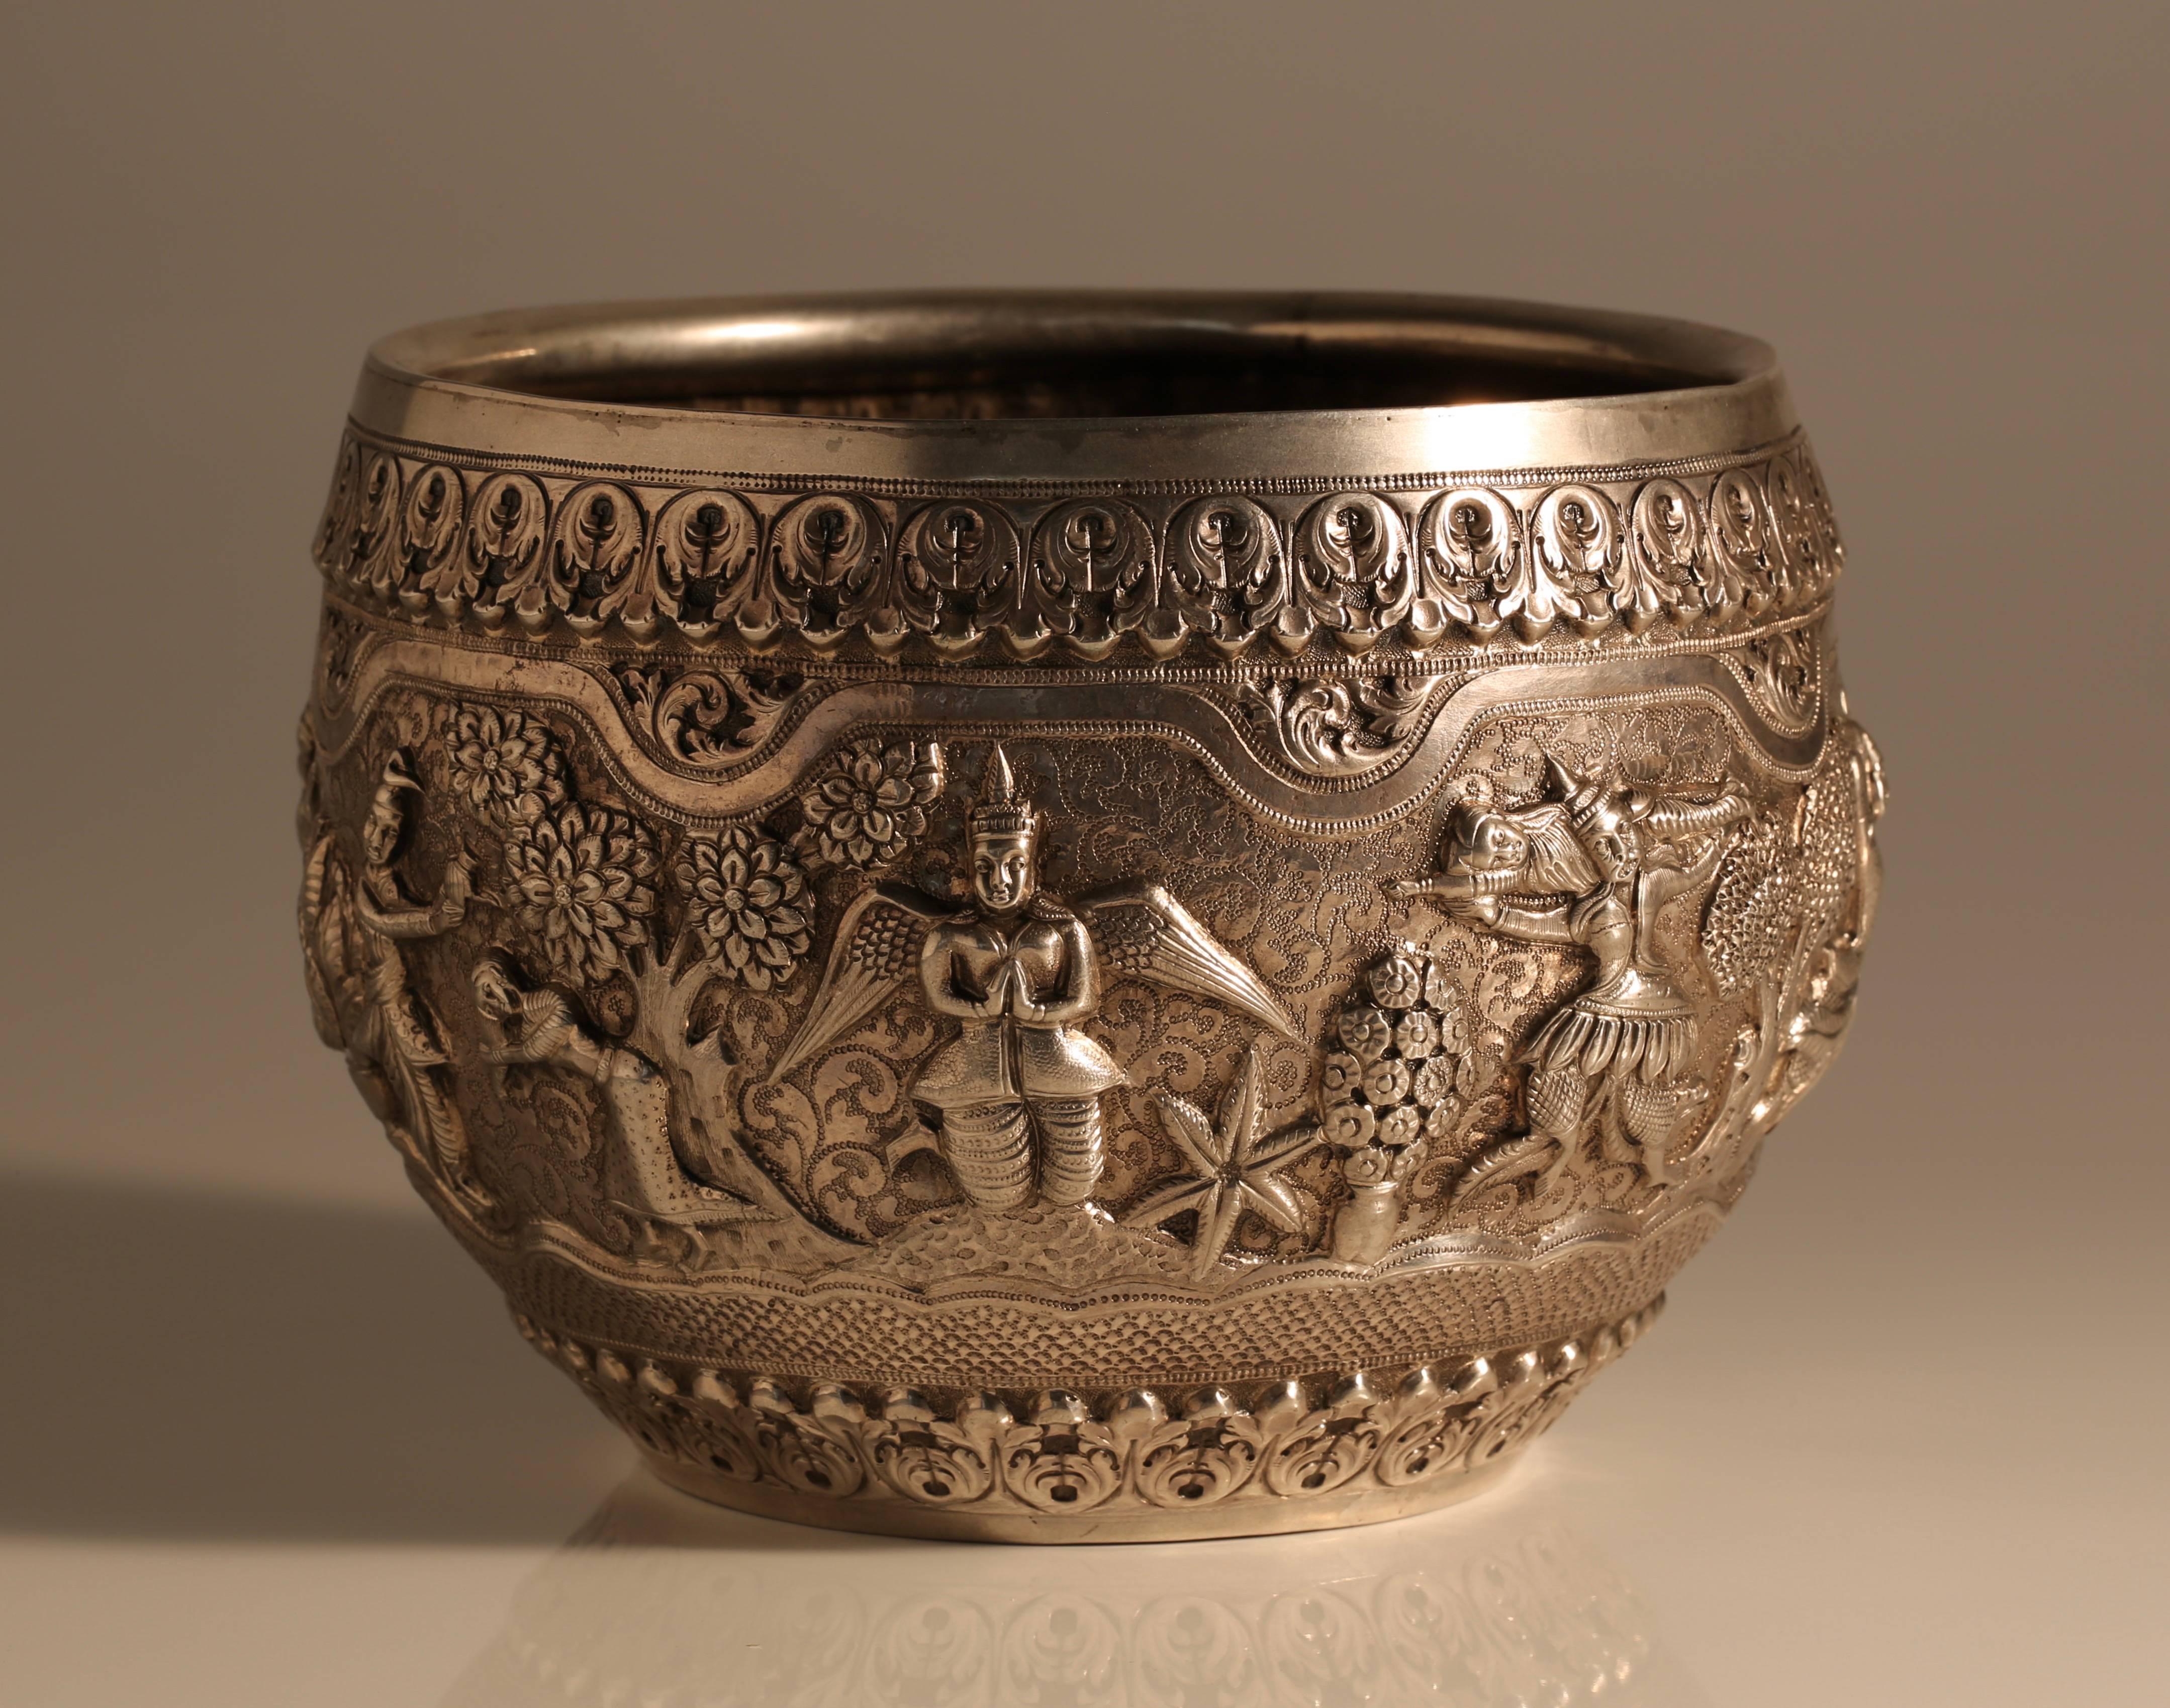 A good quality early 20th century Burmese silver bowl, heavily decorated with a typical combination of repouse and engraved decoration. A good size, suitable as a small jardiniere for an orchid or something similar, 
circa 1910.